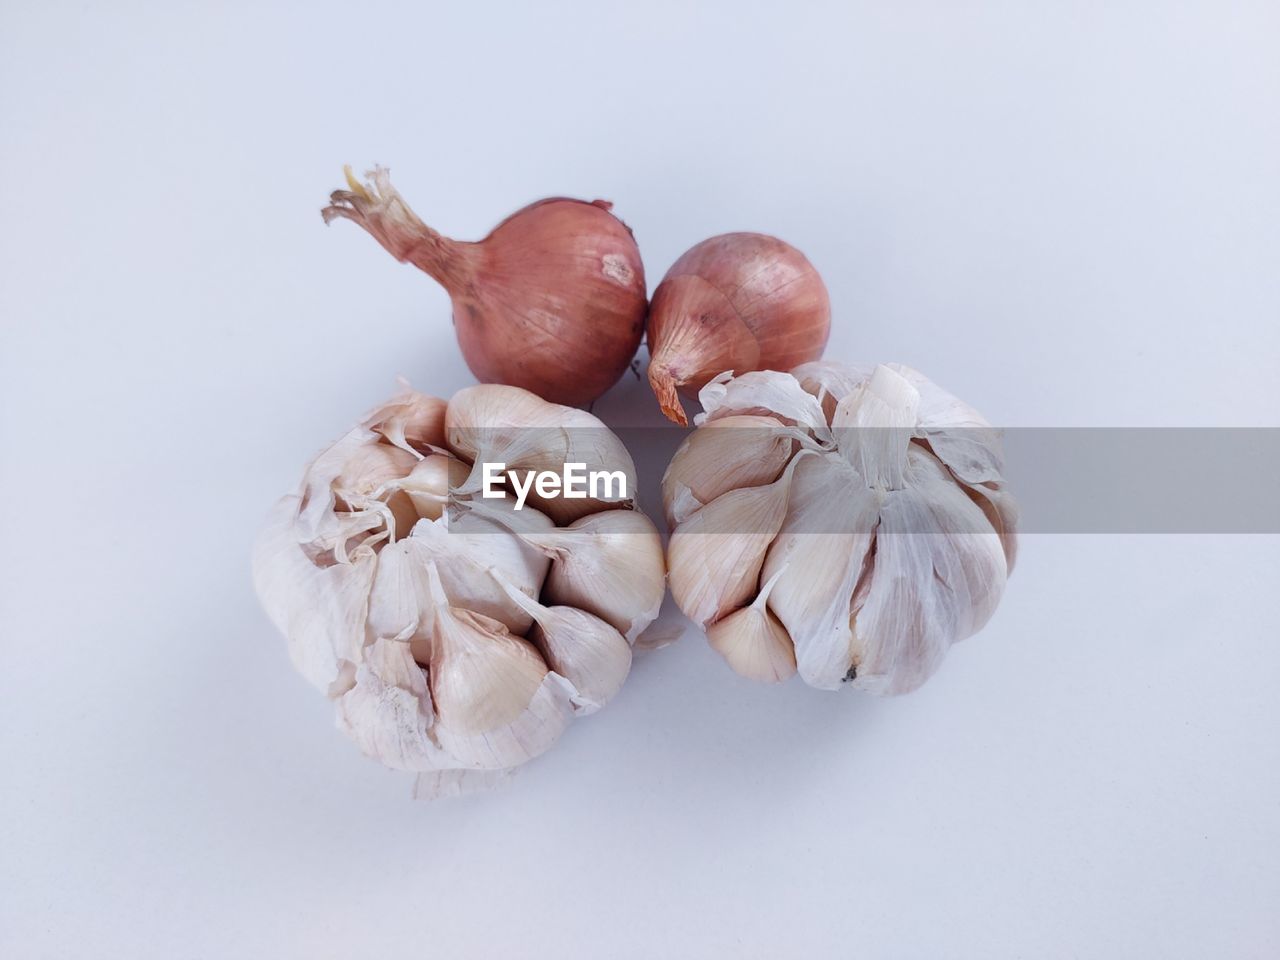 food and drink, food, plant, garlic, produce, studio shot, freshness, indoors, vegetable, flower, healthy eating, wellbeing, ingredient, still life, shallot, no people, spice, garlic bulb, group of objects, close-up, petal, raw food, gray background, onion